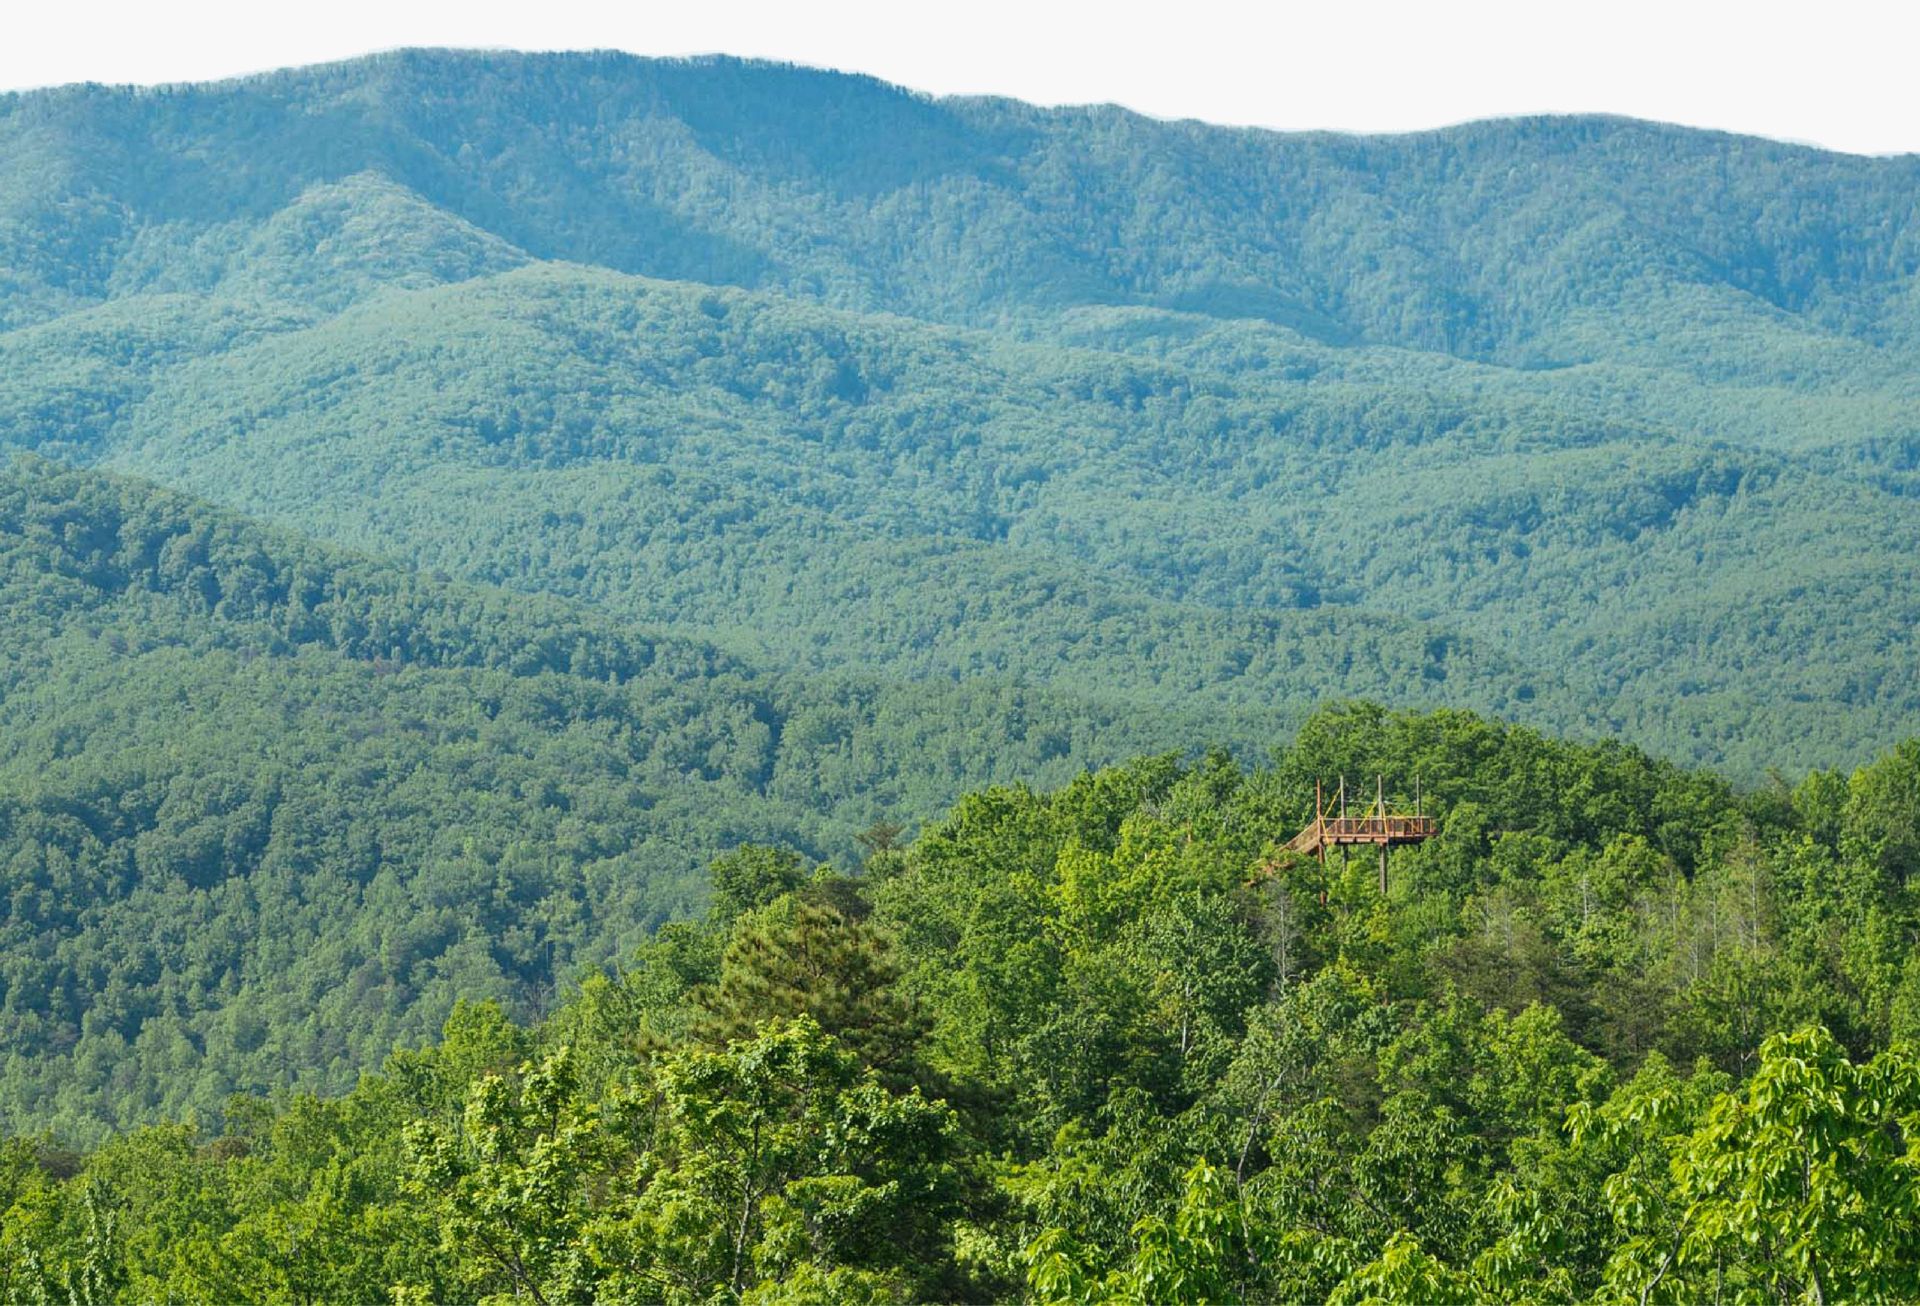 This image portrays Smoky Mountains by CLIMB Works.